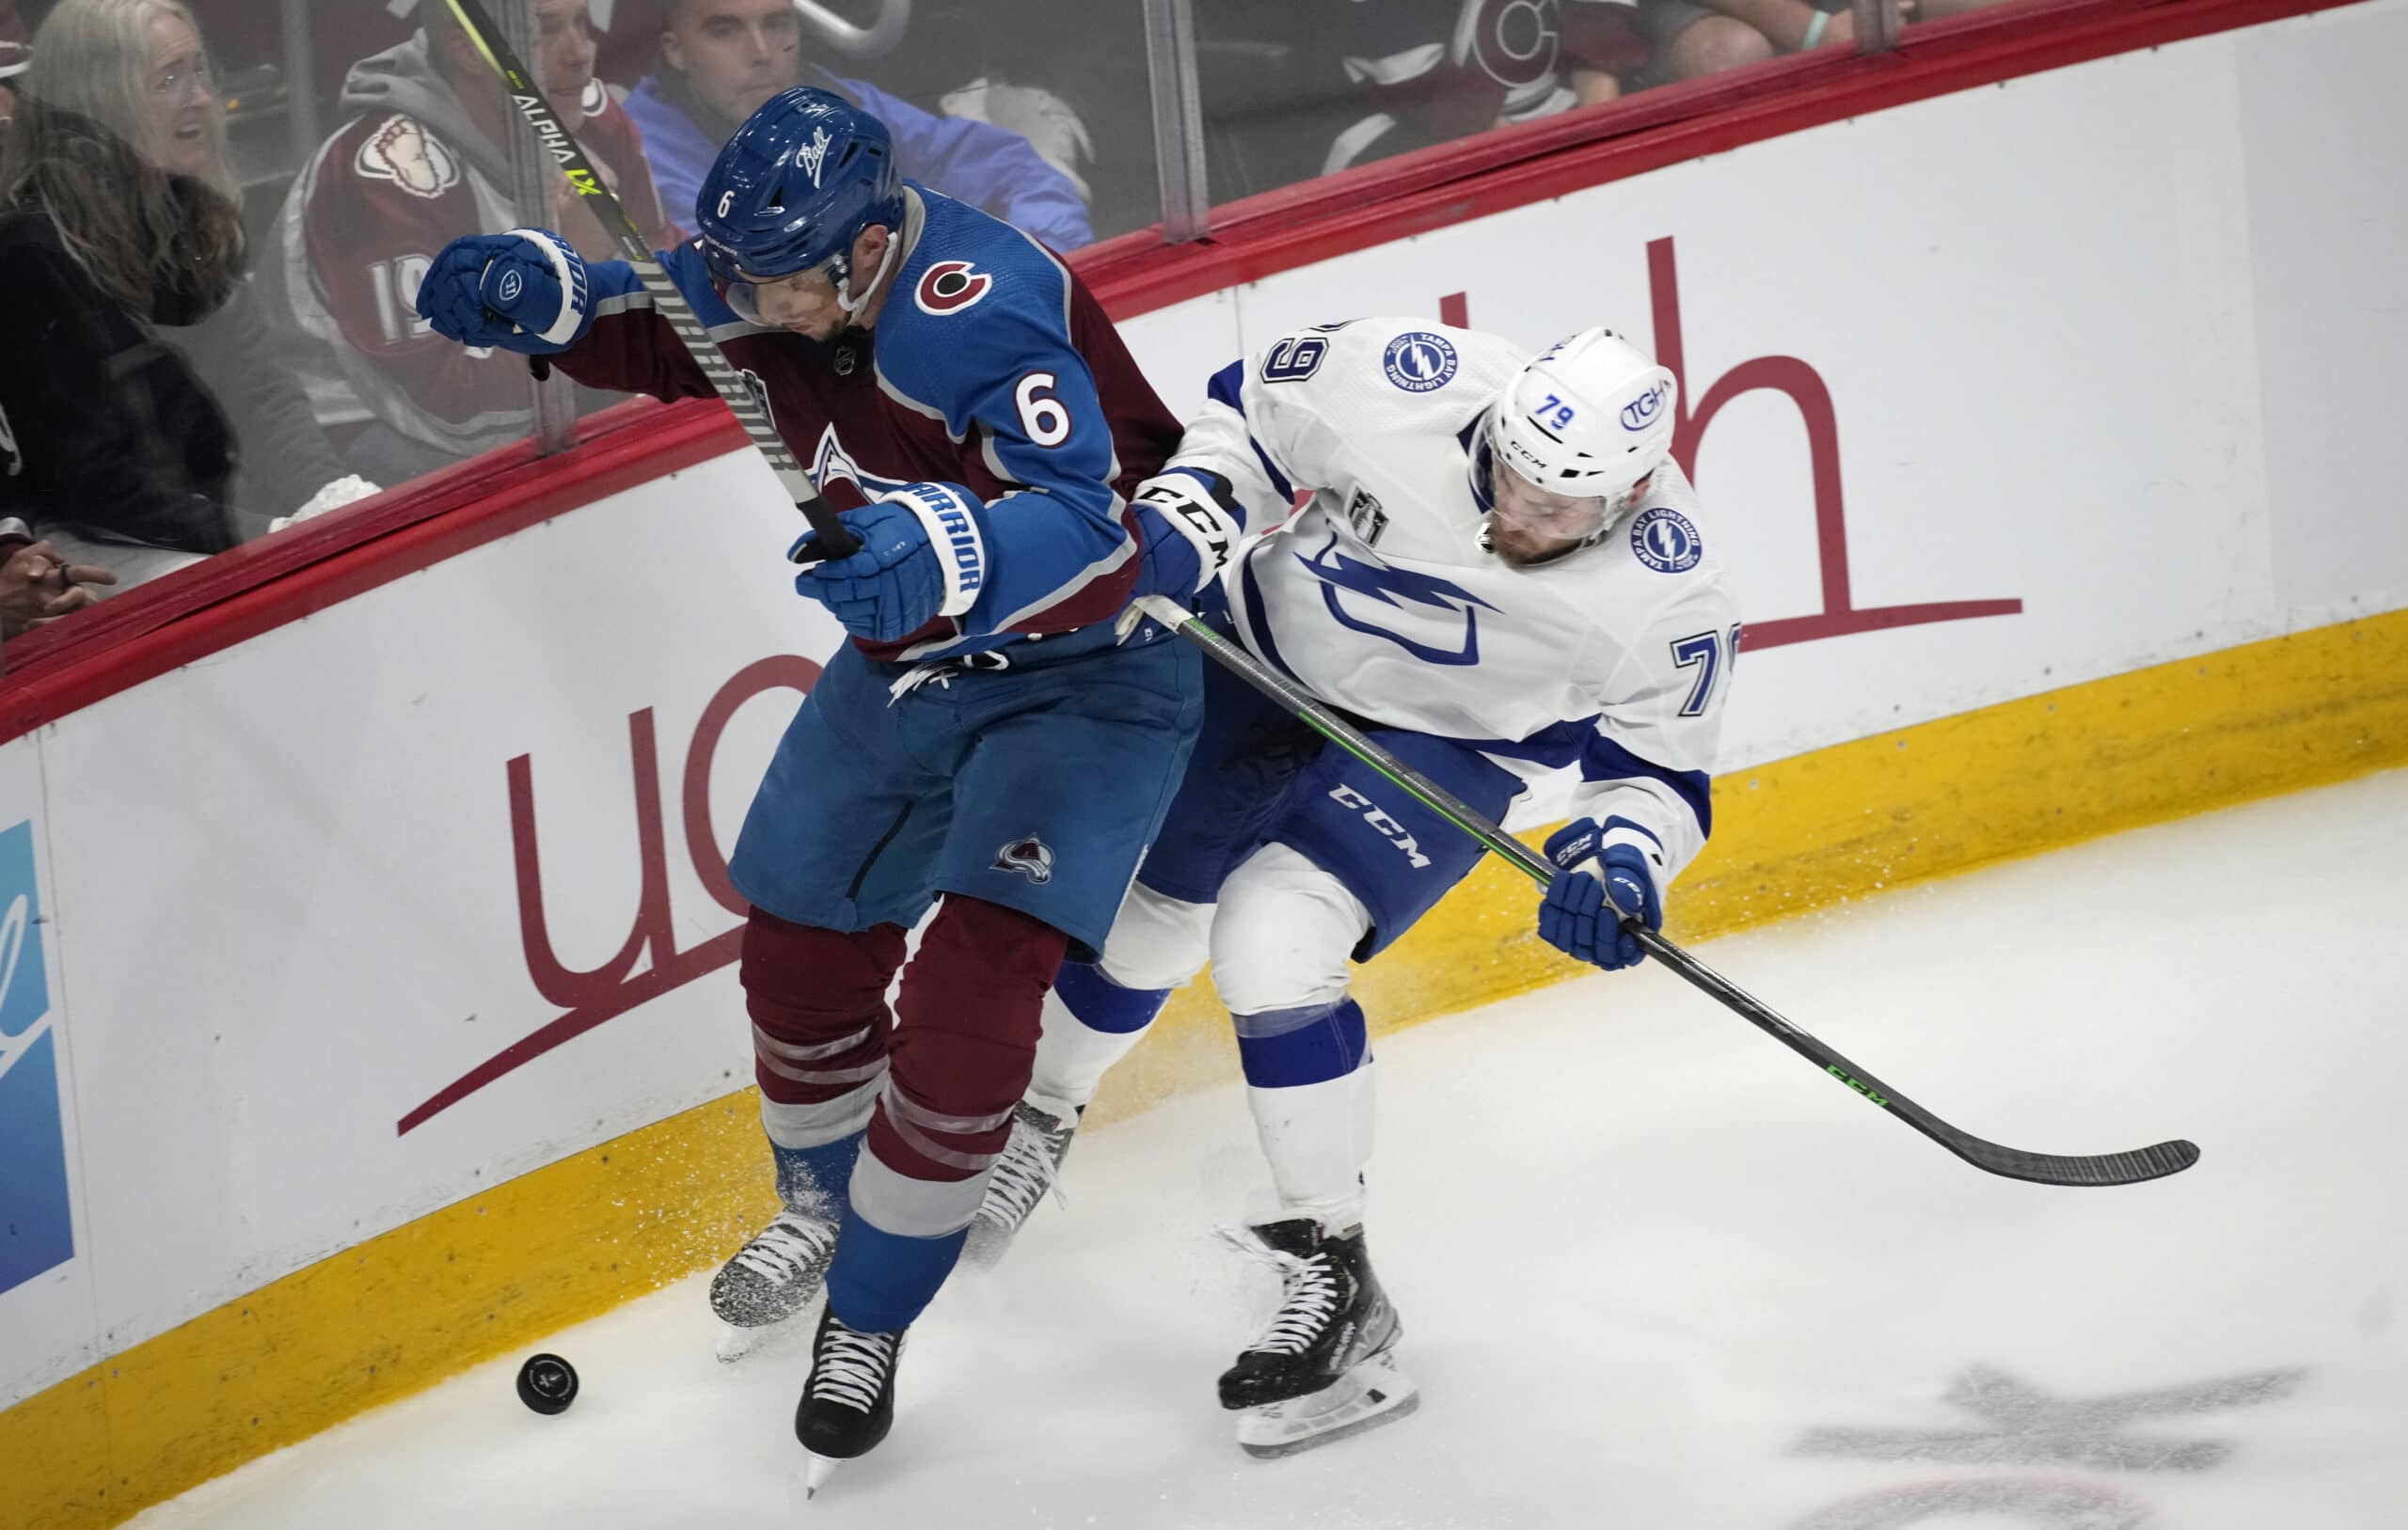 Colorado Avalanche defenseman Erik Johnson, left, and Tampa Bay Lightning center Ross Colton vie for the puck during the third period of Game 5 of the NHL hockey Stanley Cup Final, Friday, June 24, 2022, in Denver. (AP Photo/David Zalubowski)